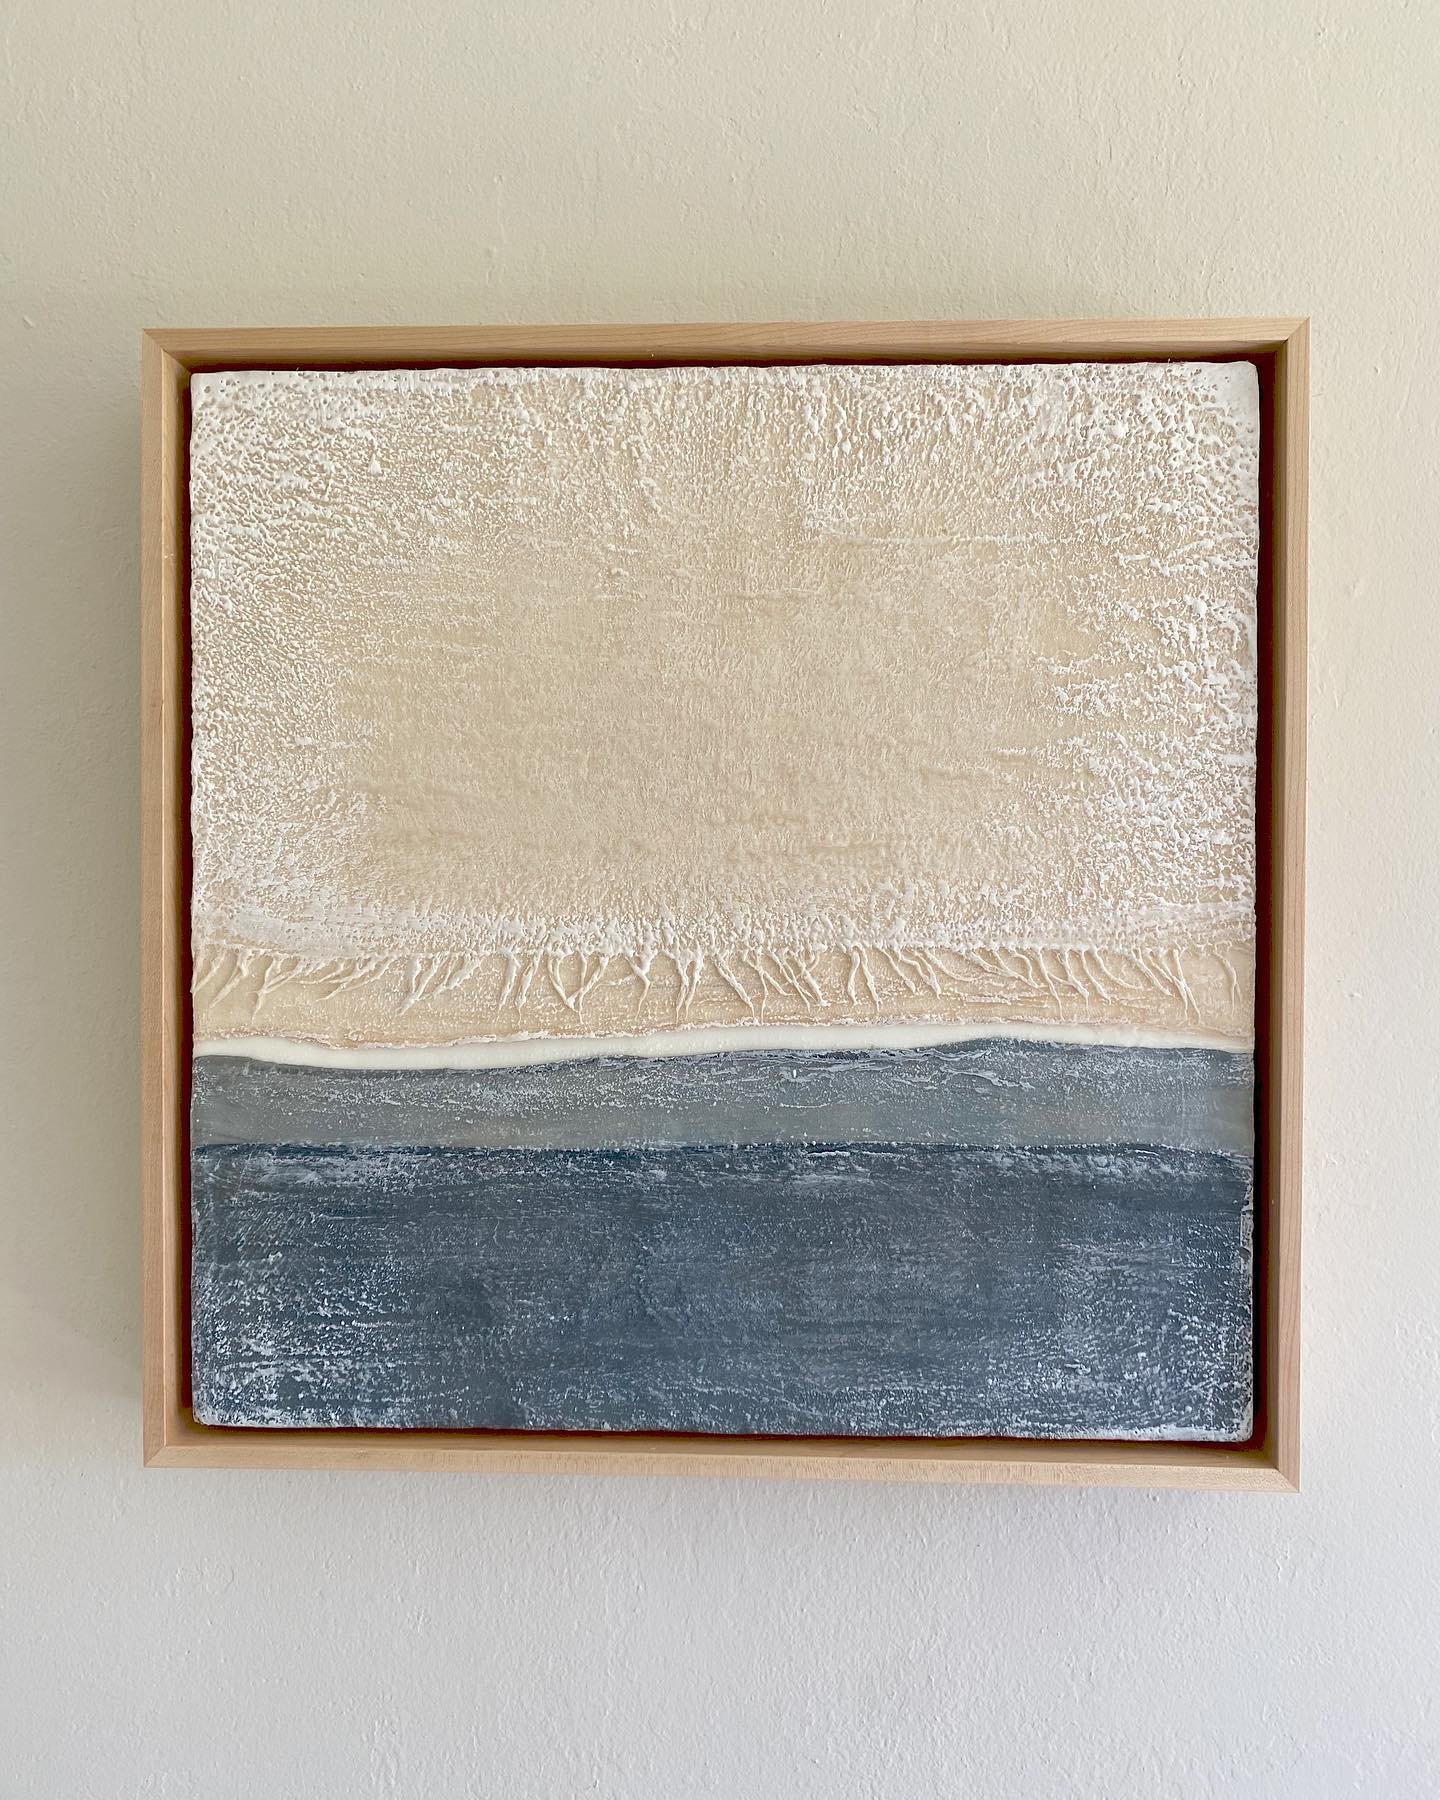 Wander Home 20x20 
Encaustic, cashmere, cotton, silk

Part of the Unfolded Collection. I love it so much
This small collection of 11 pieces will be available online in my shop this Tuesday, 5/7

Sign up for my email newsletter (link in bio) for early